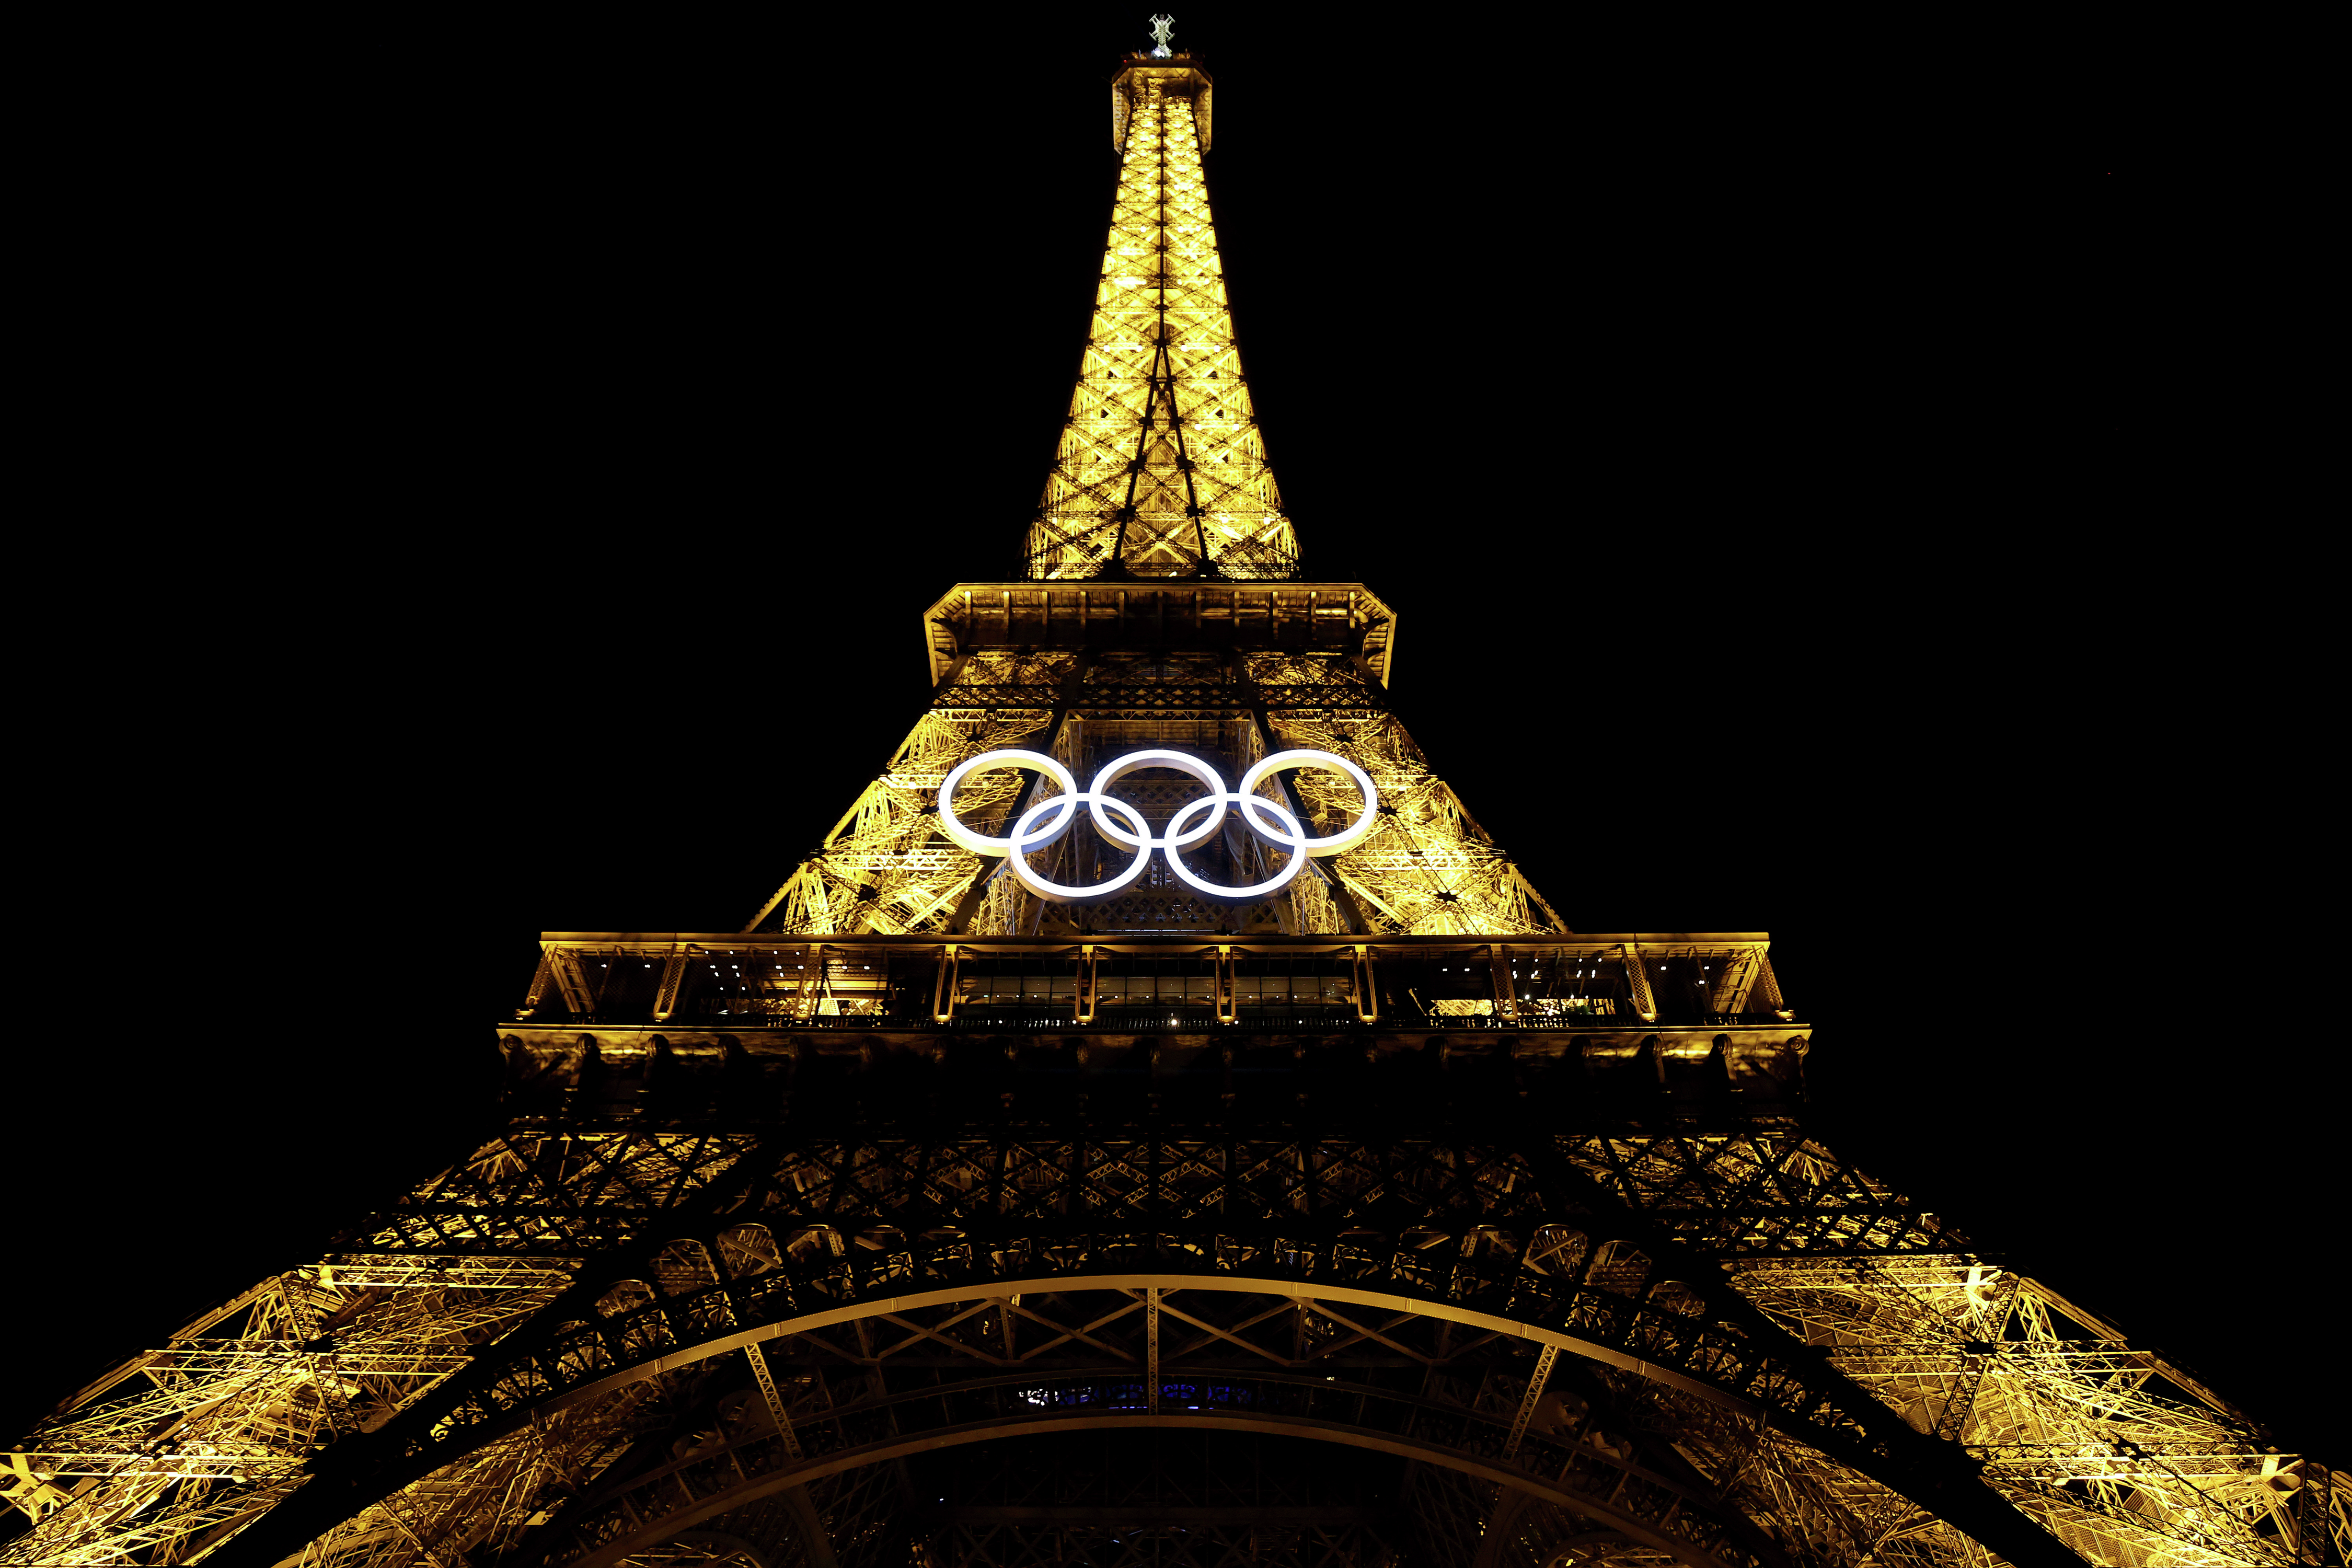 NEWSLINE: The city of Paris faces setbacks hours ahead of the Olympic opening ceremony